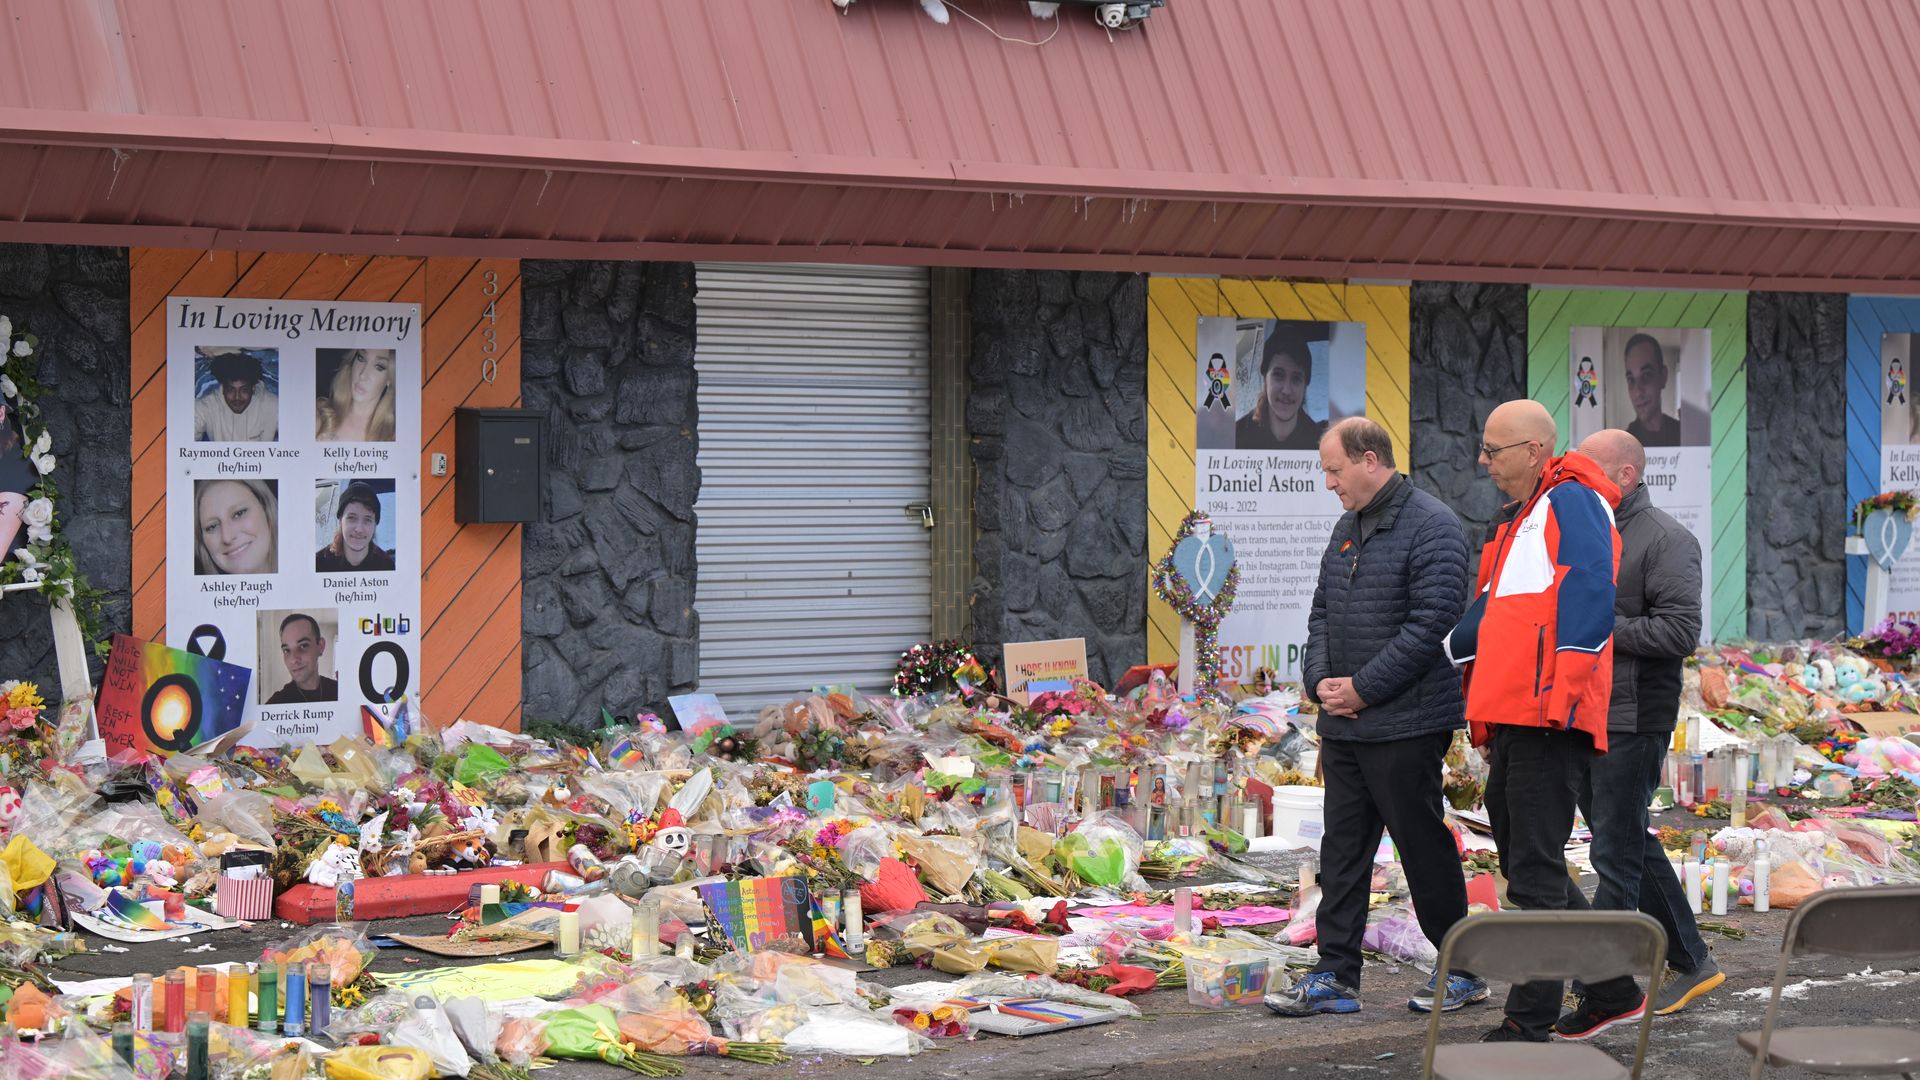 A makeshift memorial for the victims of the Club Q shooting in Colorado Springs, Colorado, in November 2022.